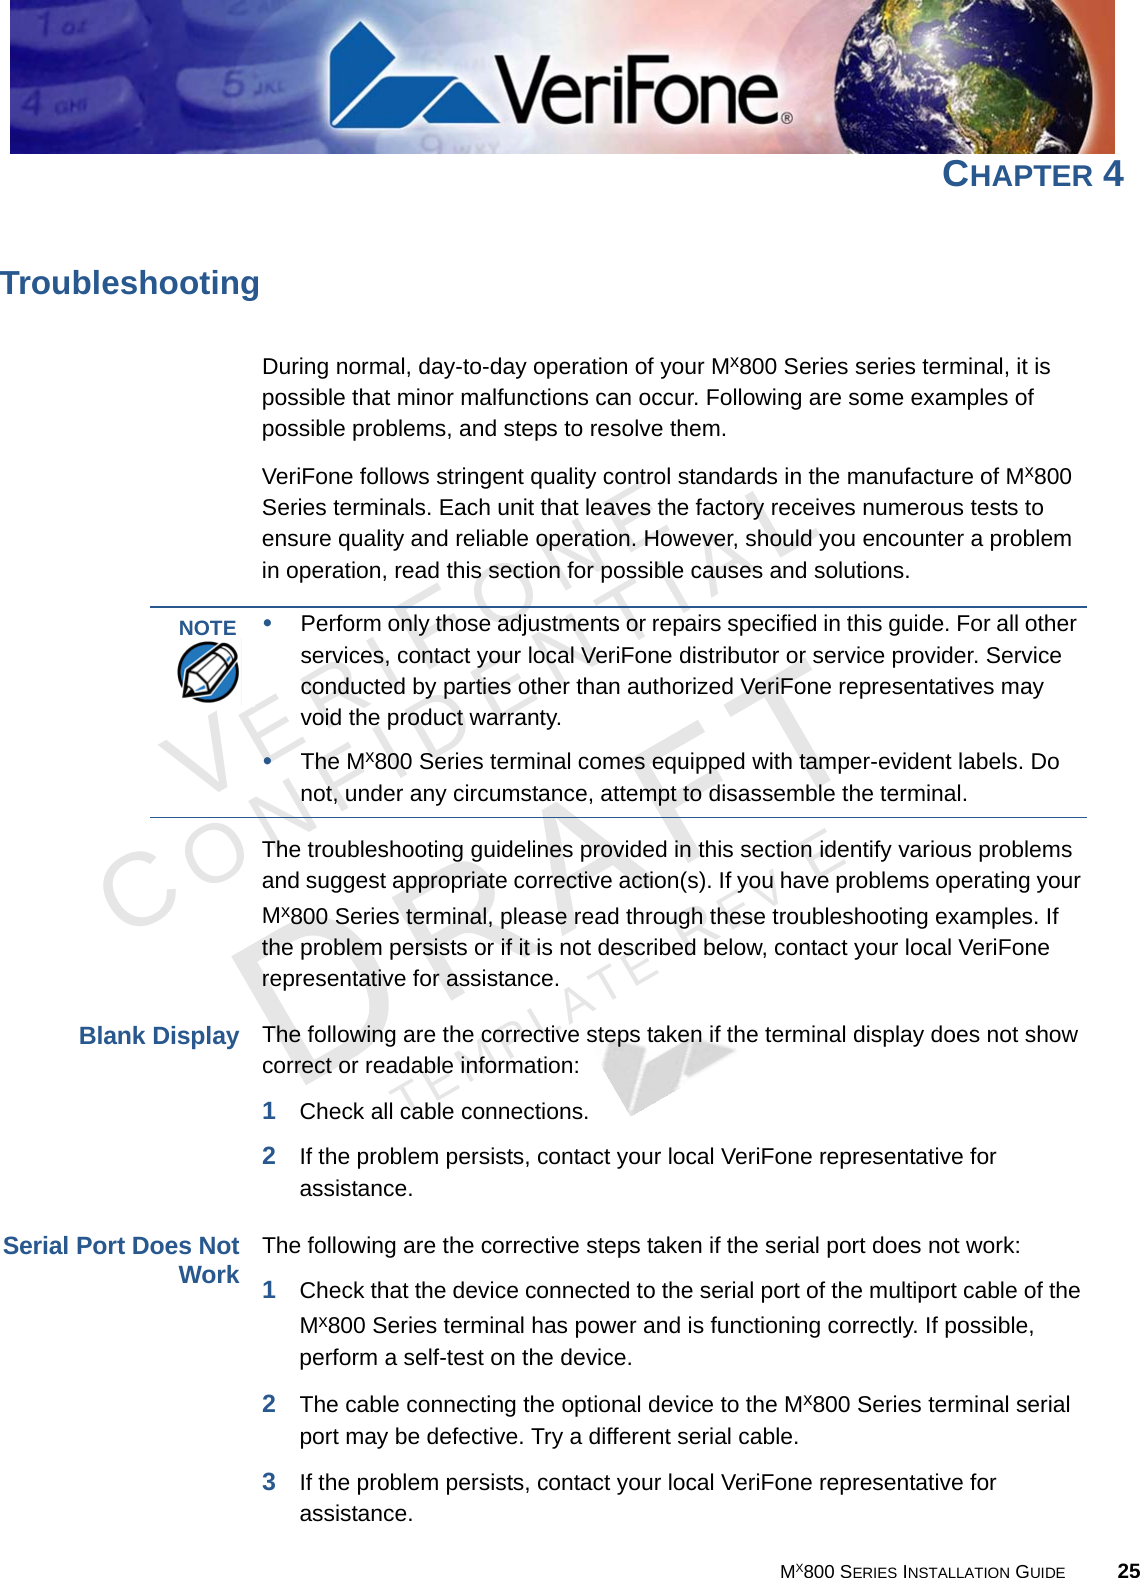 VERIFONECONFIDENTIALTEMPLATE REV E MX800 SERIES INSTALLATION GUIDE 25CHAPTER 4TroubleshootingDuring normal, day-to-day operation of your Mx800 Series series terminal, it is possible that minor malfunctions can occur. Following are some examples of possible problems, and steps to resolve them. VeriFone follows stringent quality control standards in the manufacture of Mx800 Series terminals. Each unit that leaves the factory receives numerous tests to ensure quality and reliable operation. However, should you encounter a problem in operation, read this section for possible causes and solutions.The troubleshooting guidelines provided in this section identify various problems and suggest appropriate corrective action(s). If you have problems operating your Mx800 Series terminal, please read through these troubleshooting examples. If the problem persists or if it is not described below, contact your local VeriFone representative for assistance.Blank DisplayThe following are the corrective steps taken if the terminal display does not show correct or readable information:1Check all cable connections.2If the problem persists, contact your local VeriFone representative for assistance.Serial Port Does NotWorkThe following are the corrective steps taken if the serial port does not work:1Check that the device connected to the serial port of the multiport cable of the Mx800 Series terminal has power and is functioning correctly. If possible, perform a self-test on the device.2The cable connecting the optional device to the Mx800 Series terminal serial port may be defective. Try a different serial cable.3If the problem persists, contact your local VeriFone representative for assistance.NOTE •Perform only those adjustments or repairs specified in this guide. For all other services, contact your local VeriFone distributor or service provider. Service conducted by parties other than authorized VeriFone representatives may void the product warranty.•The Mx800 Series terminal comes equipped with tamper-evident labels. Do not, under any circumstance, attempt to disassemble the terminal.